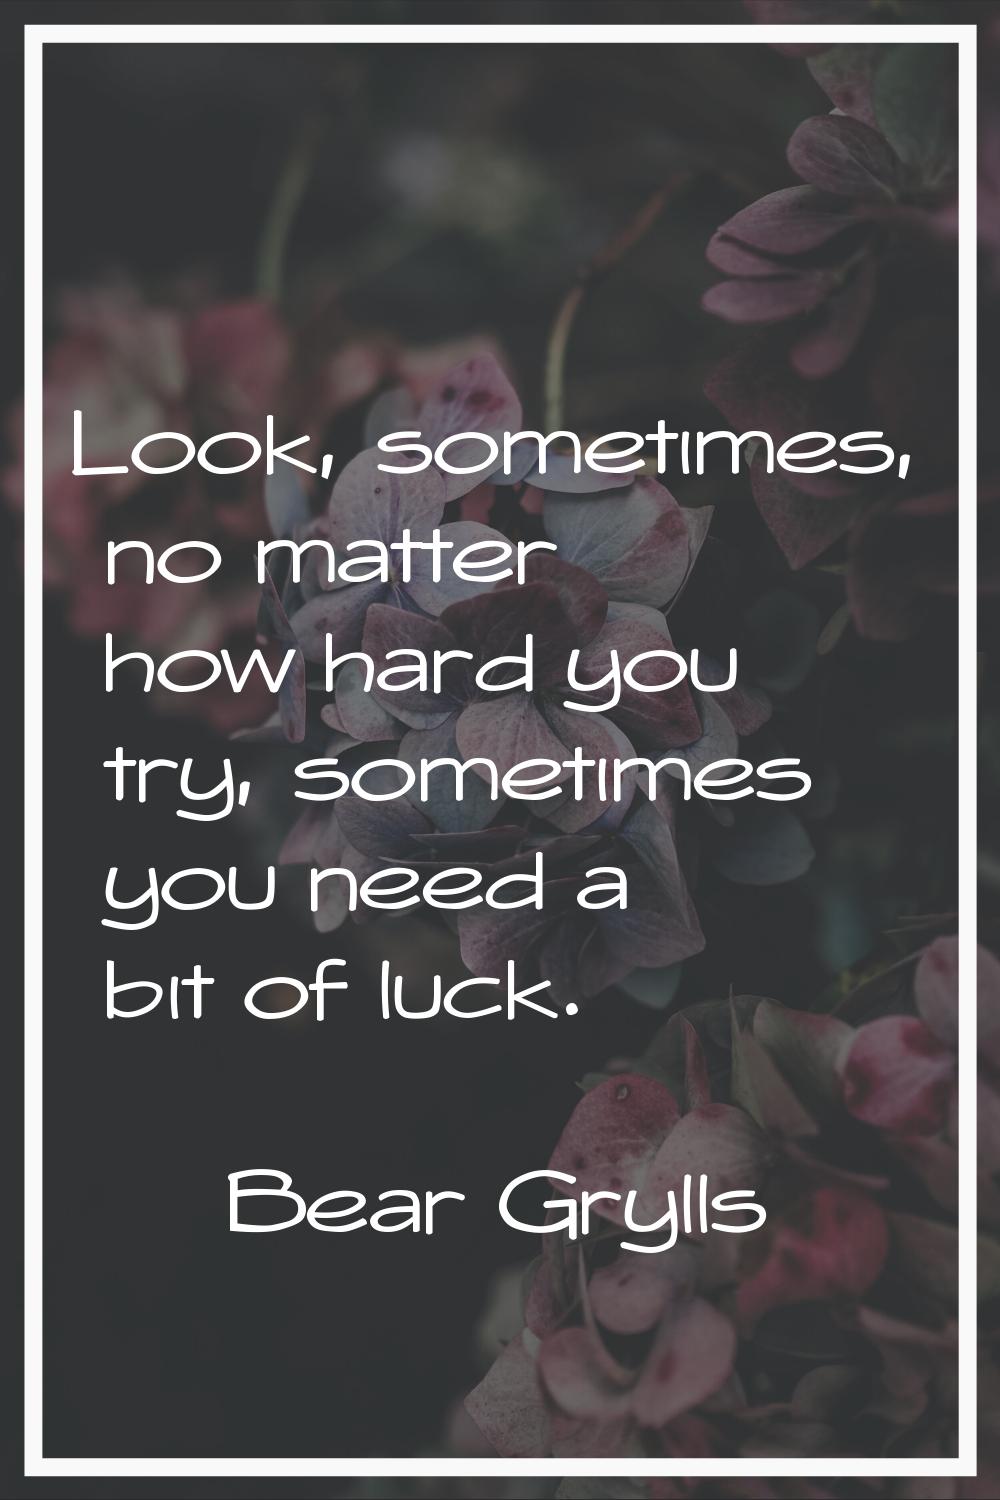 Look, sometimes, no matter how hard you try, sometimes you need a bit of luck.